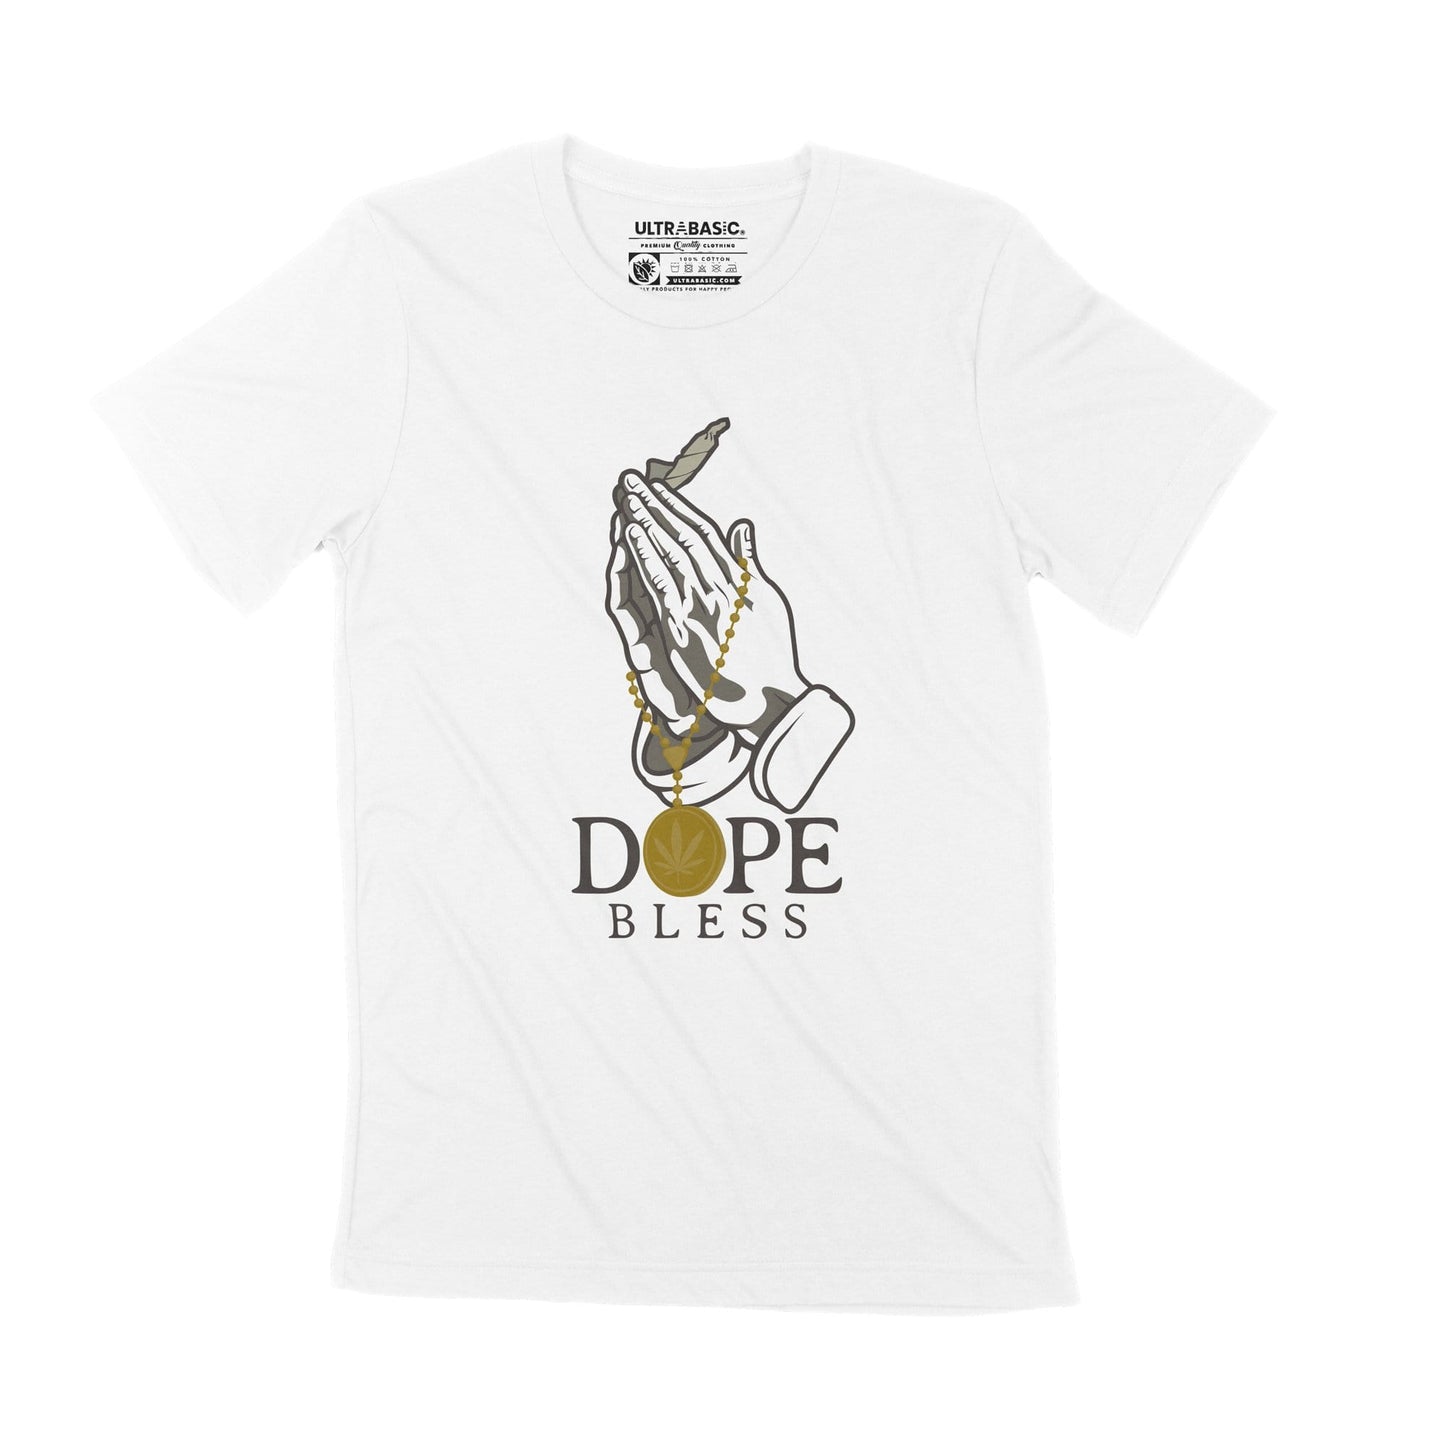 praying hands god blessed rap rappers noah king kxng crooked spokewheel music gifts lifestyle graphic tee funny tshirts tshirt design 